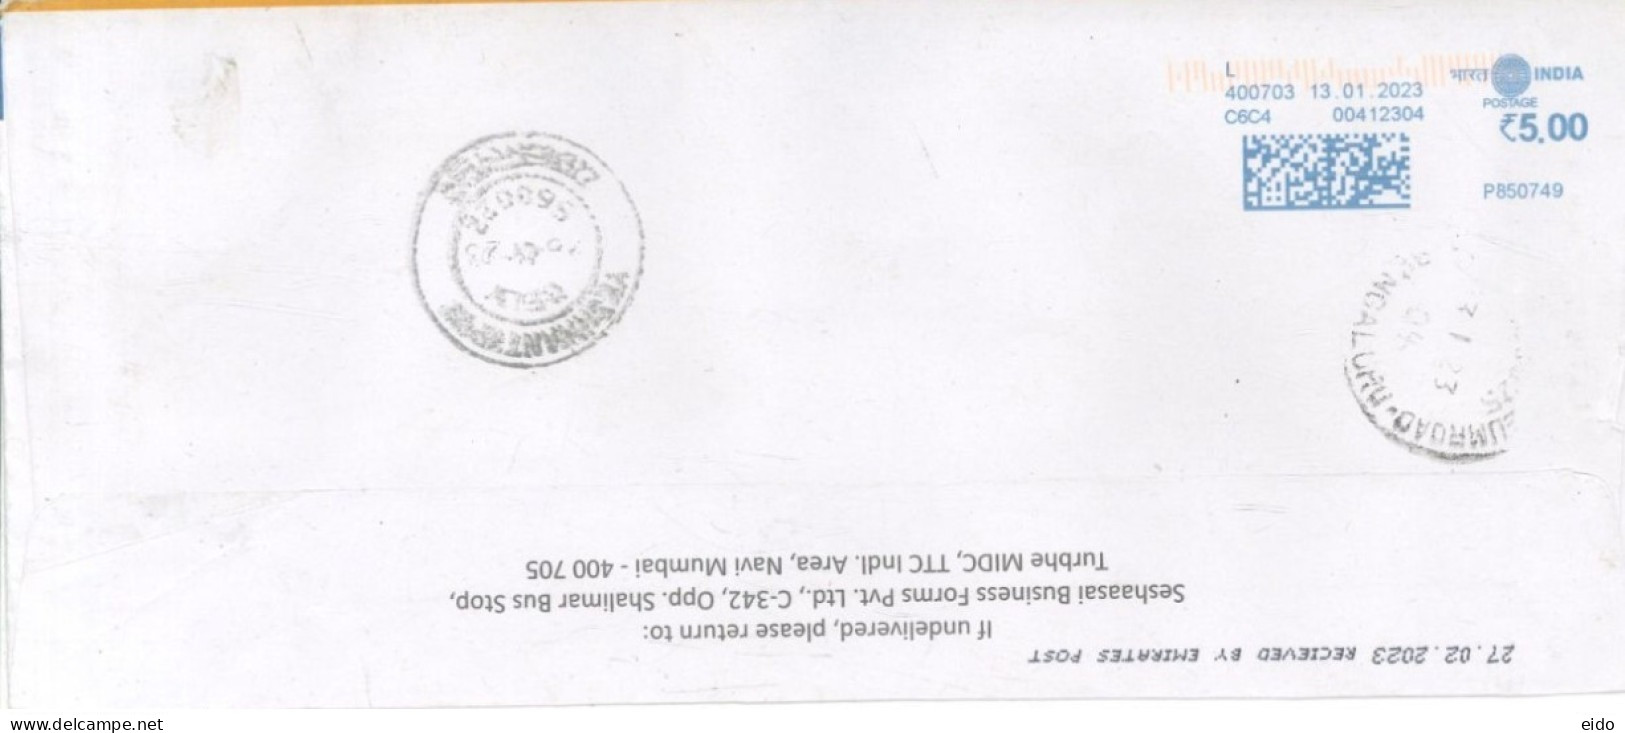 INDIA - 2023 - POSTAL FRANKING MACHINE COVERS QTY : 2, TO DUBAI . - Covers & Documents